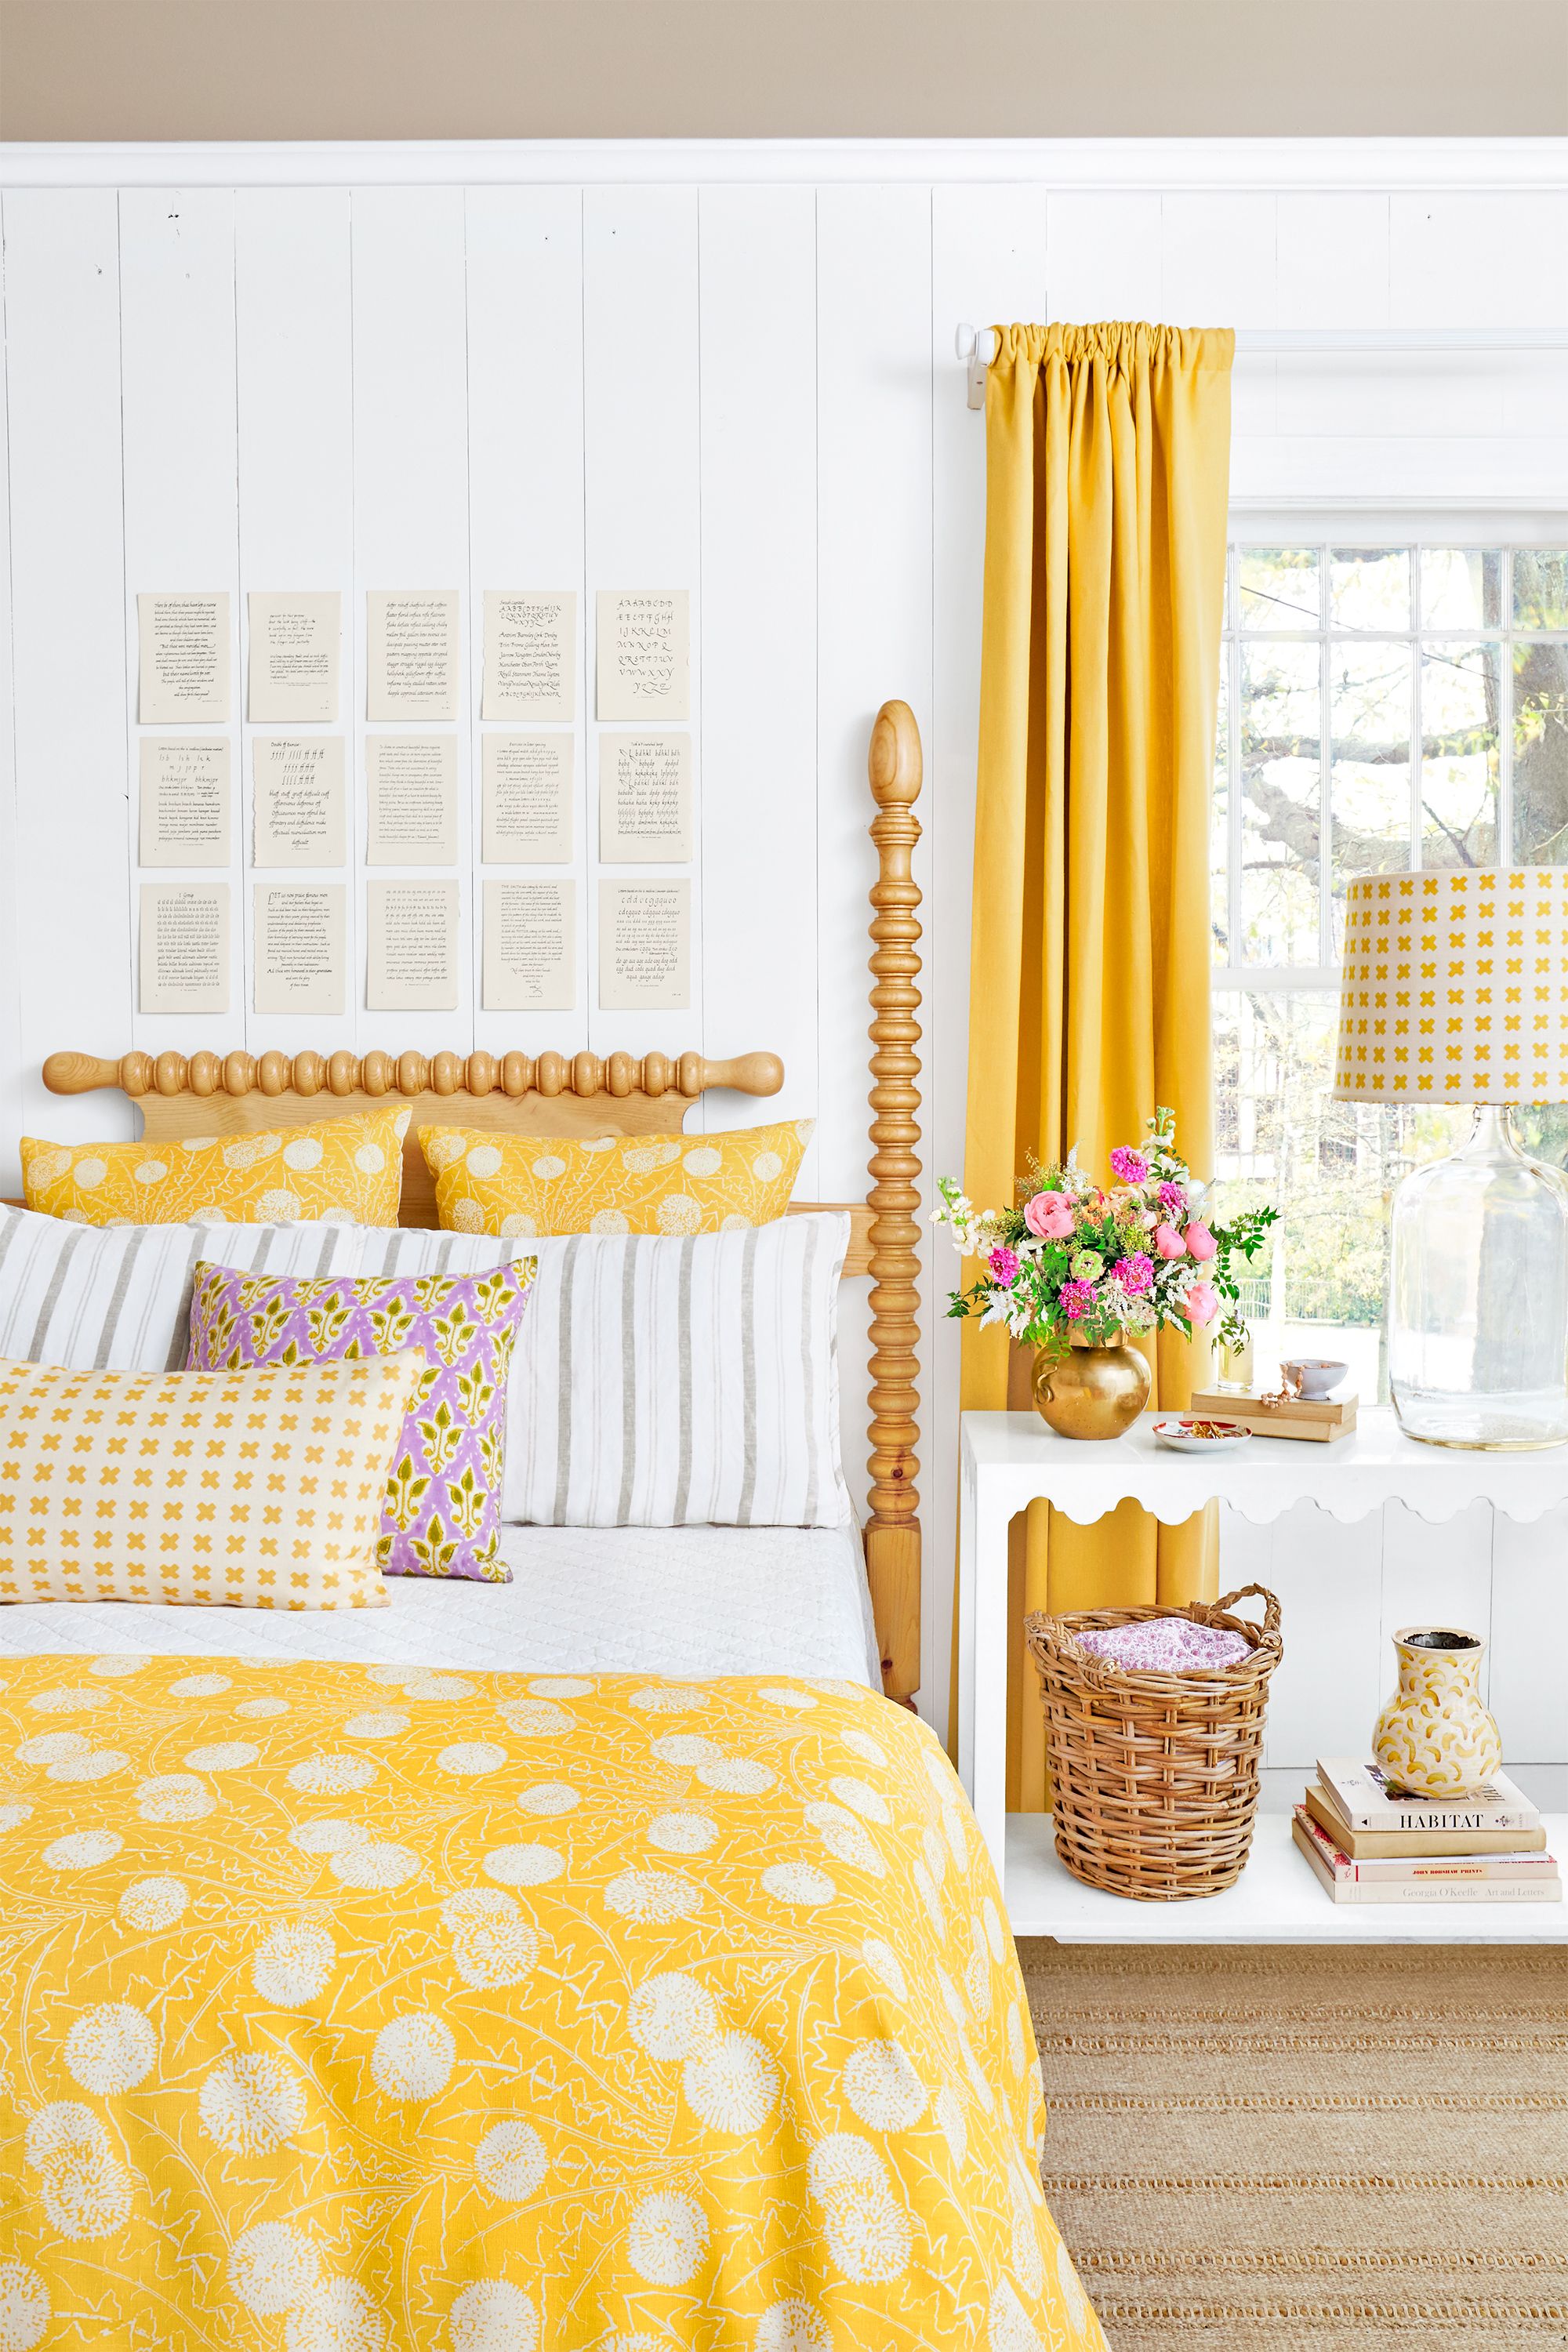 17 Designer-Approved Ways to Decorate With Yellow in the Bedroom